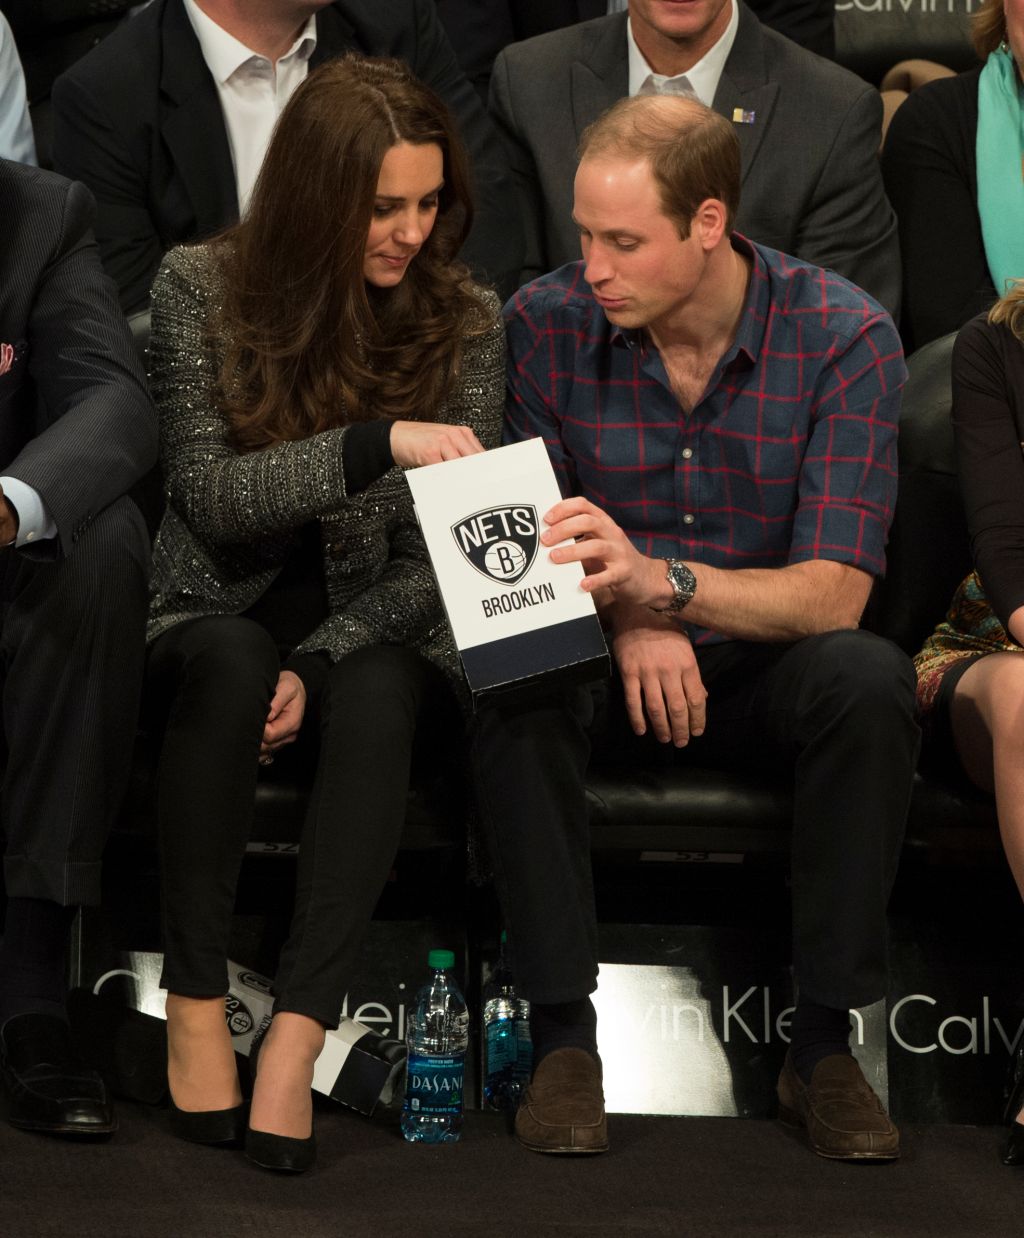 prince william kate middleton nets game barclays center